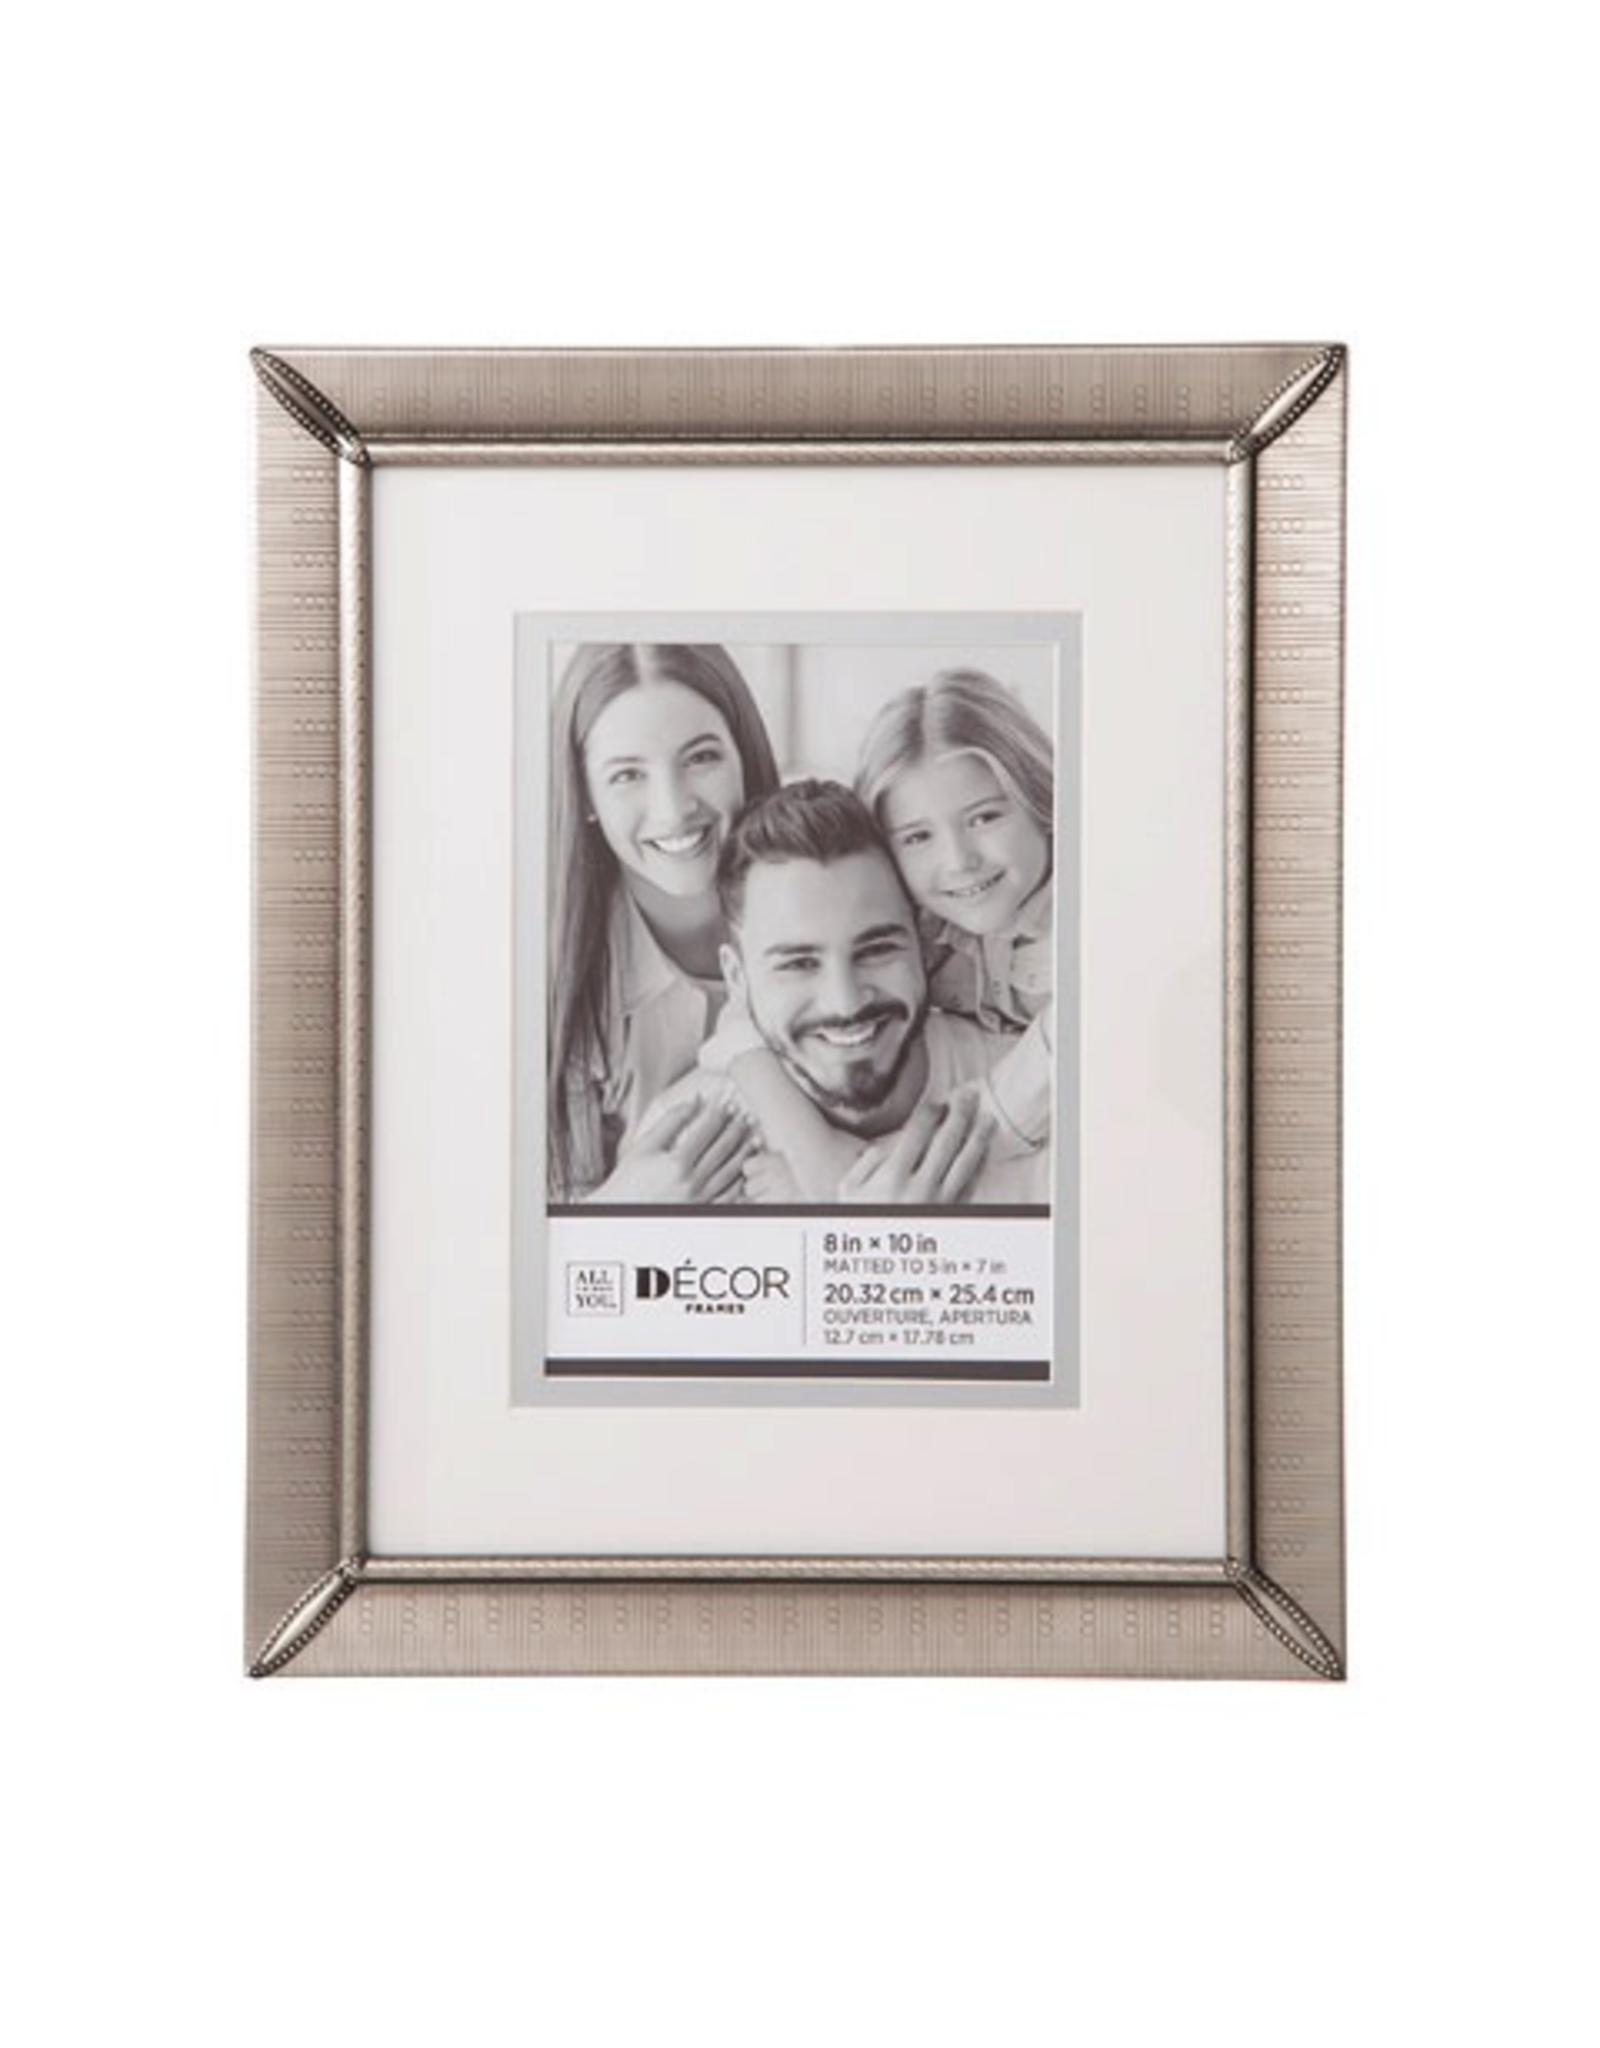 Darice Brushed Pewter Picture Frame 8x10 Matted to 5x7